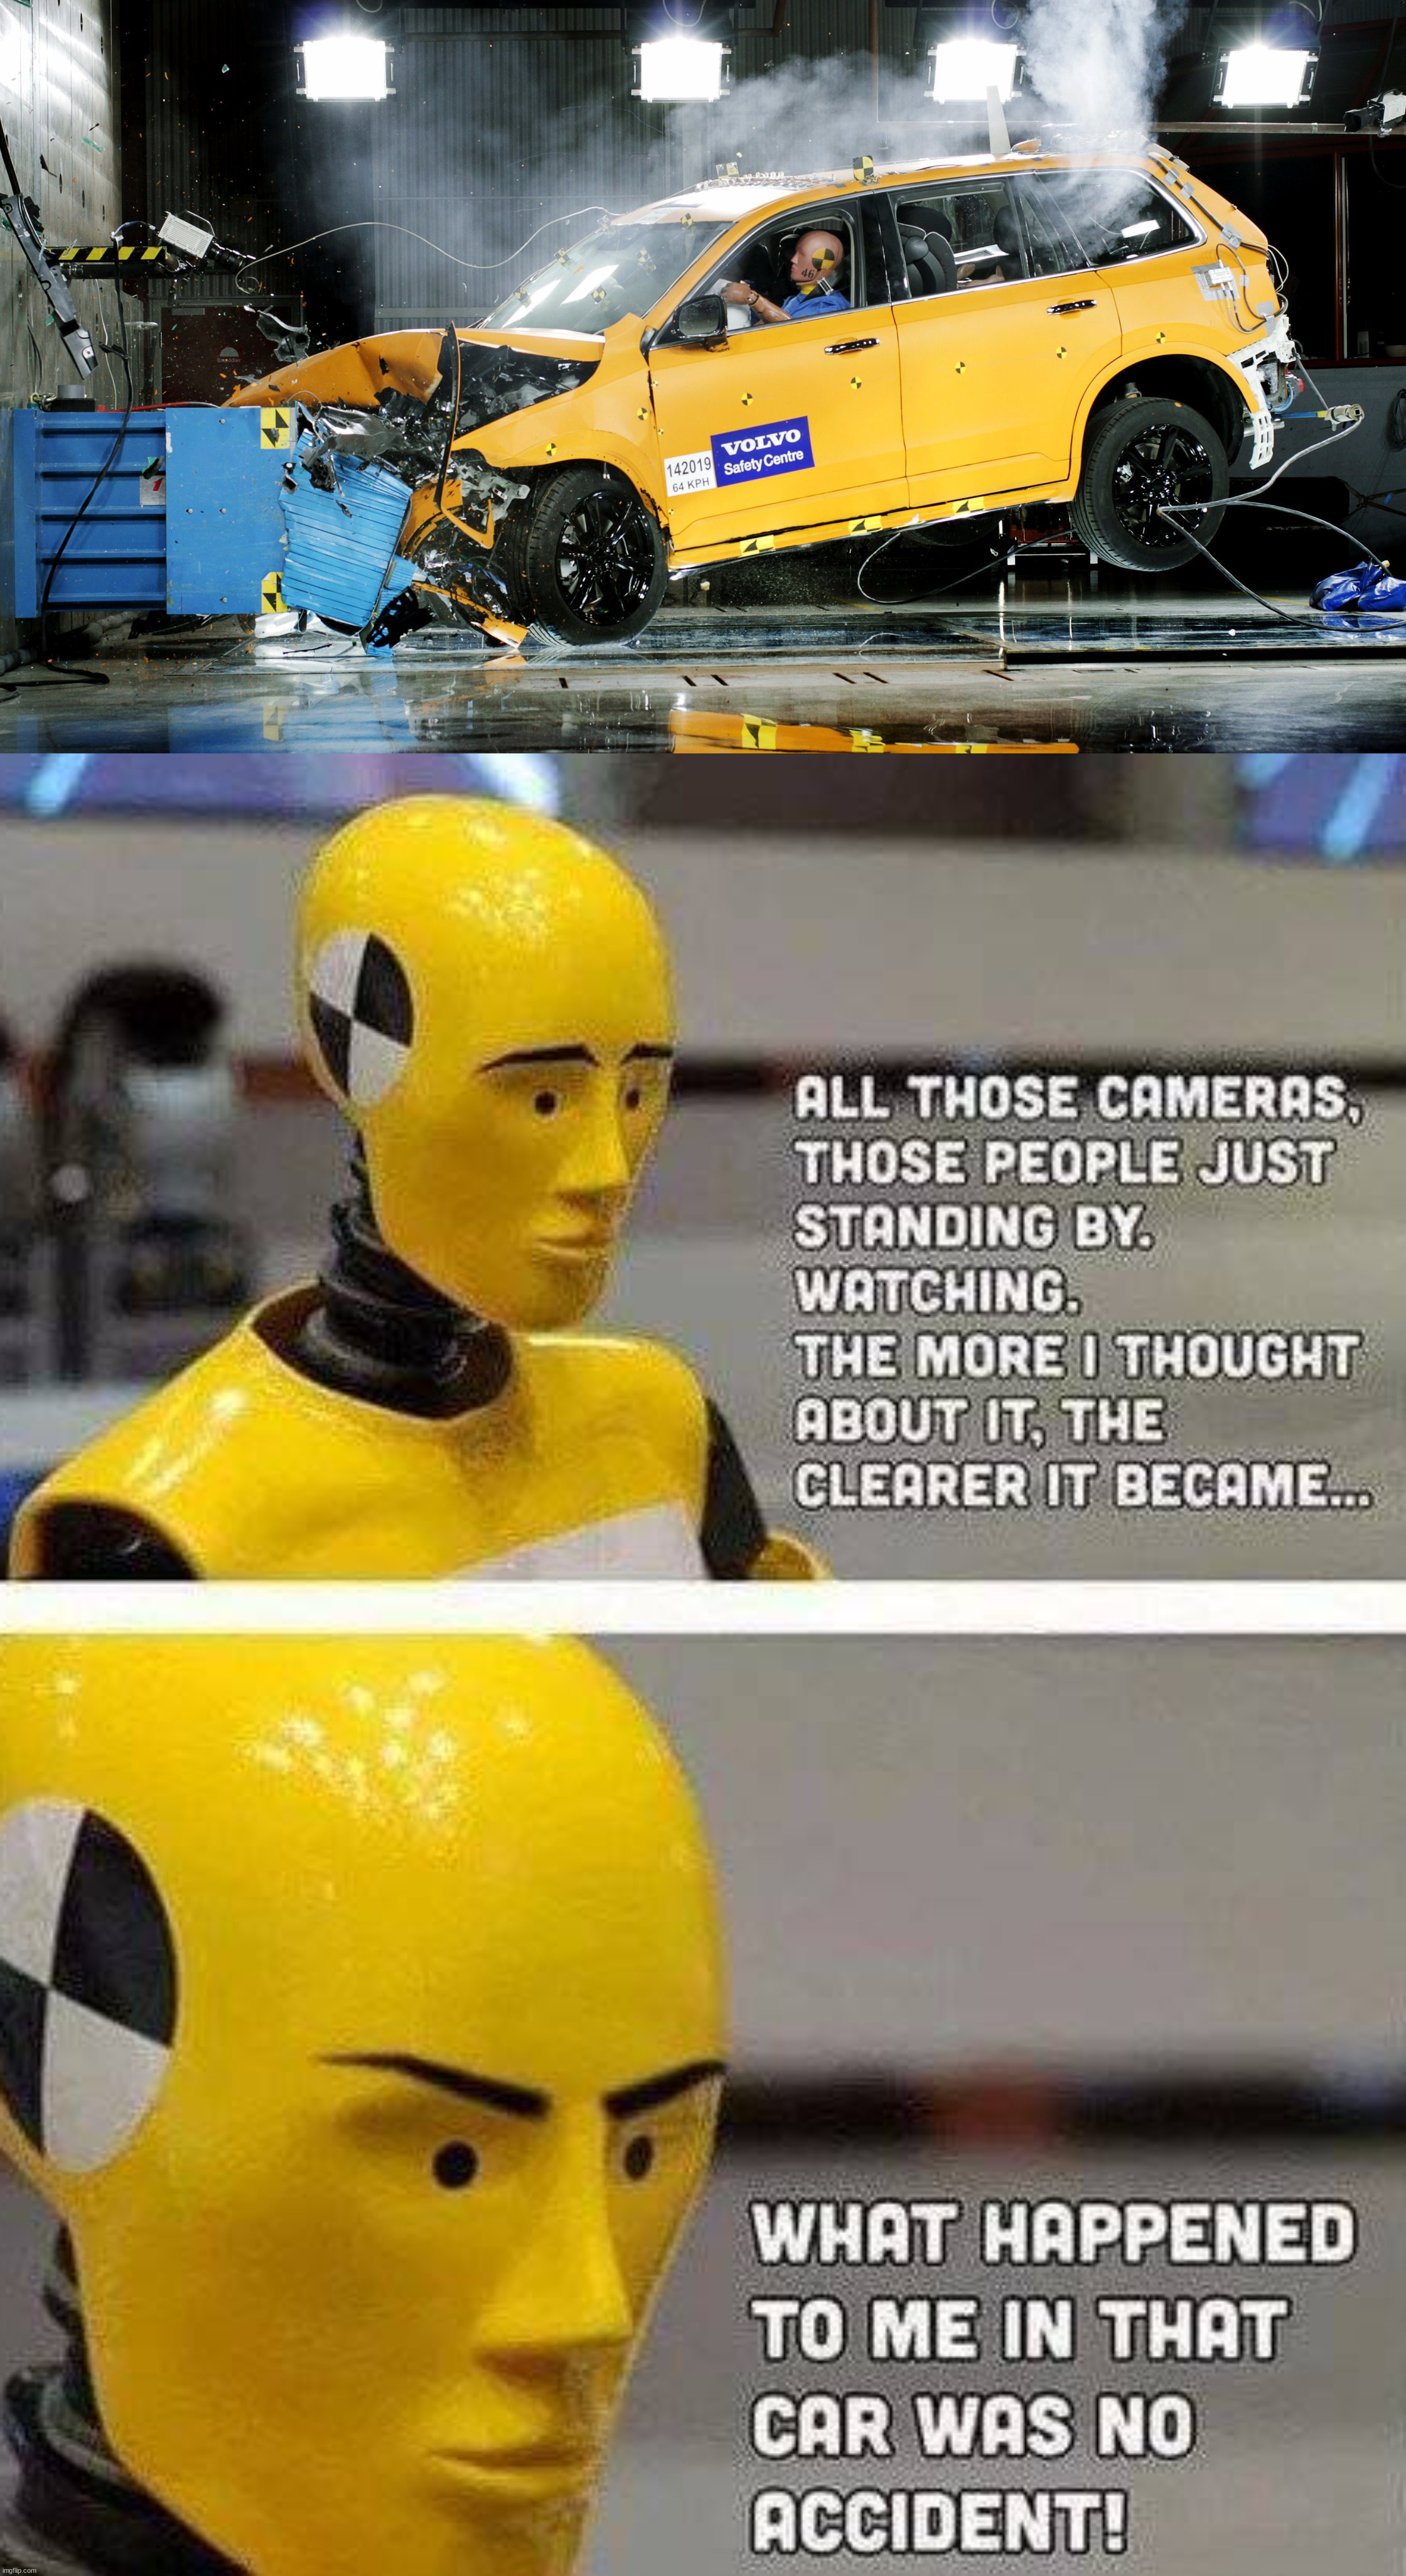 It was no accident dummy | image tagged in crash,dummy,accident | made w/ Imgflip meme maker